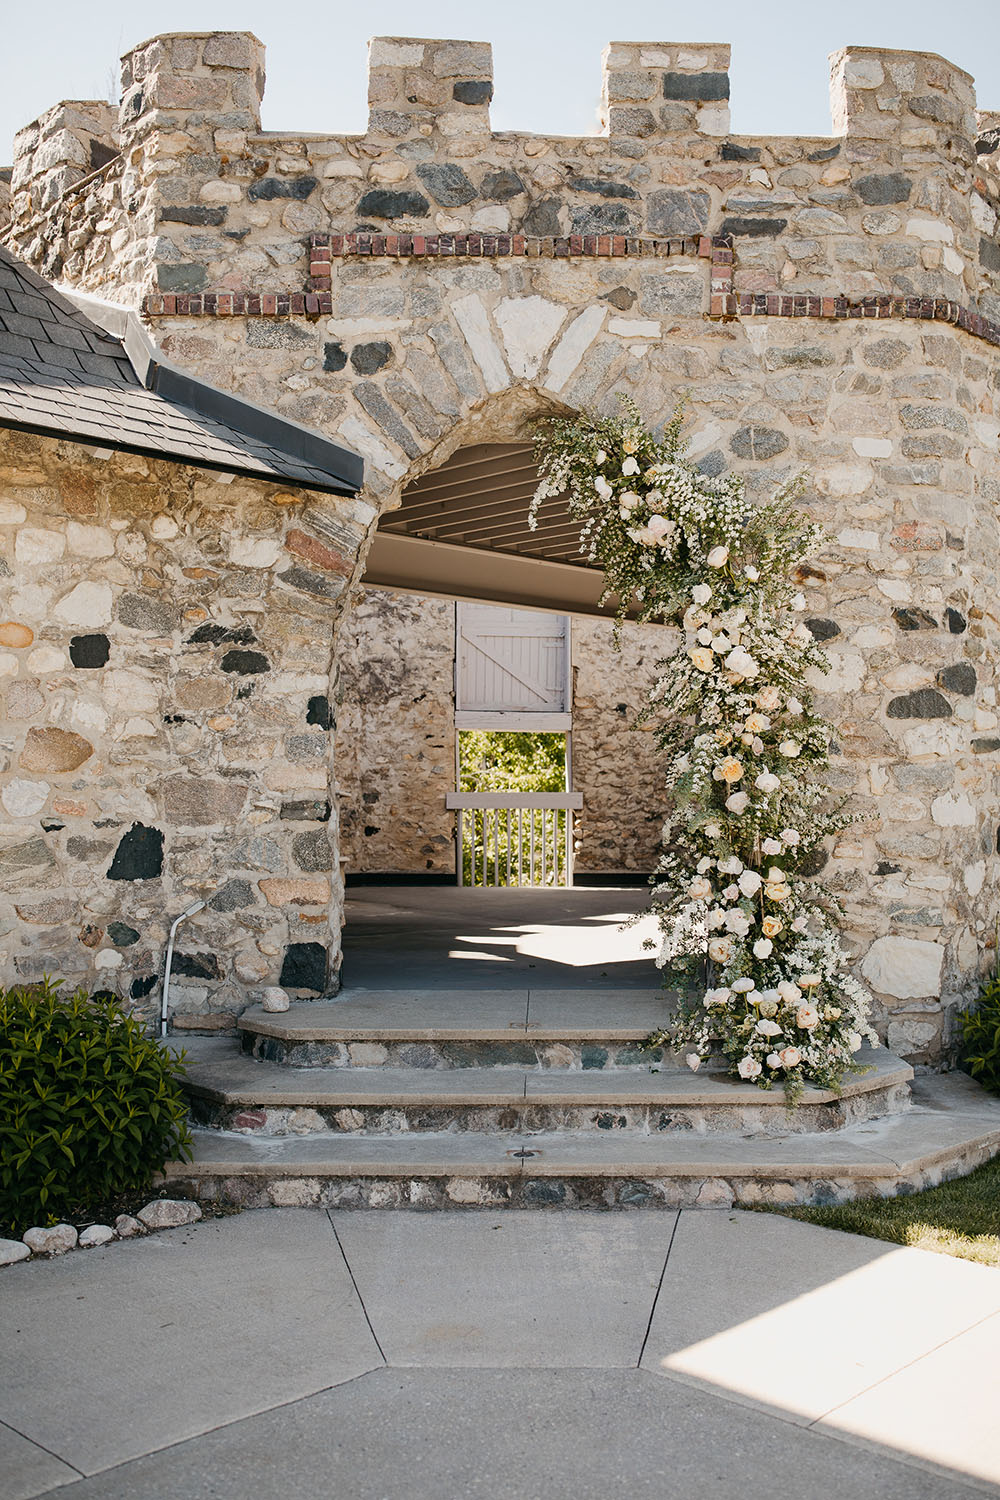 Michigan chateau wedding venue with climbing florals on an old stone wall